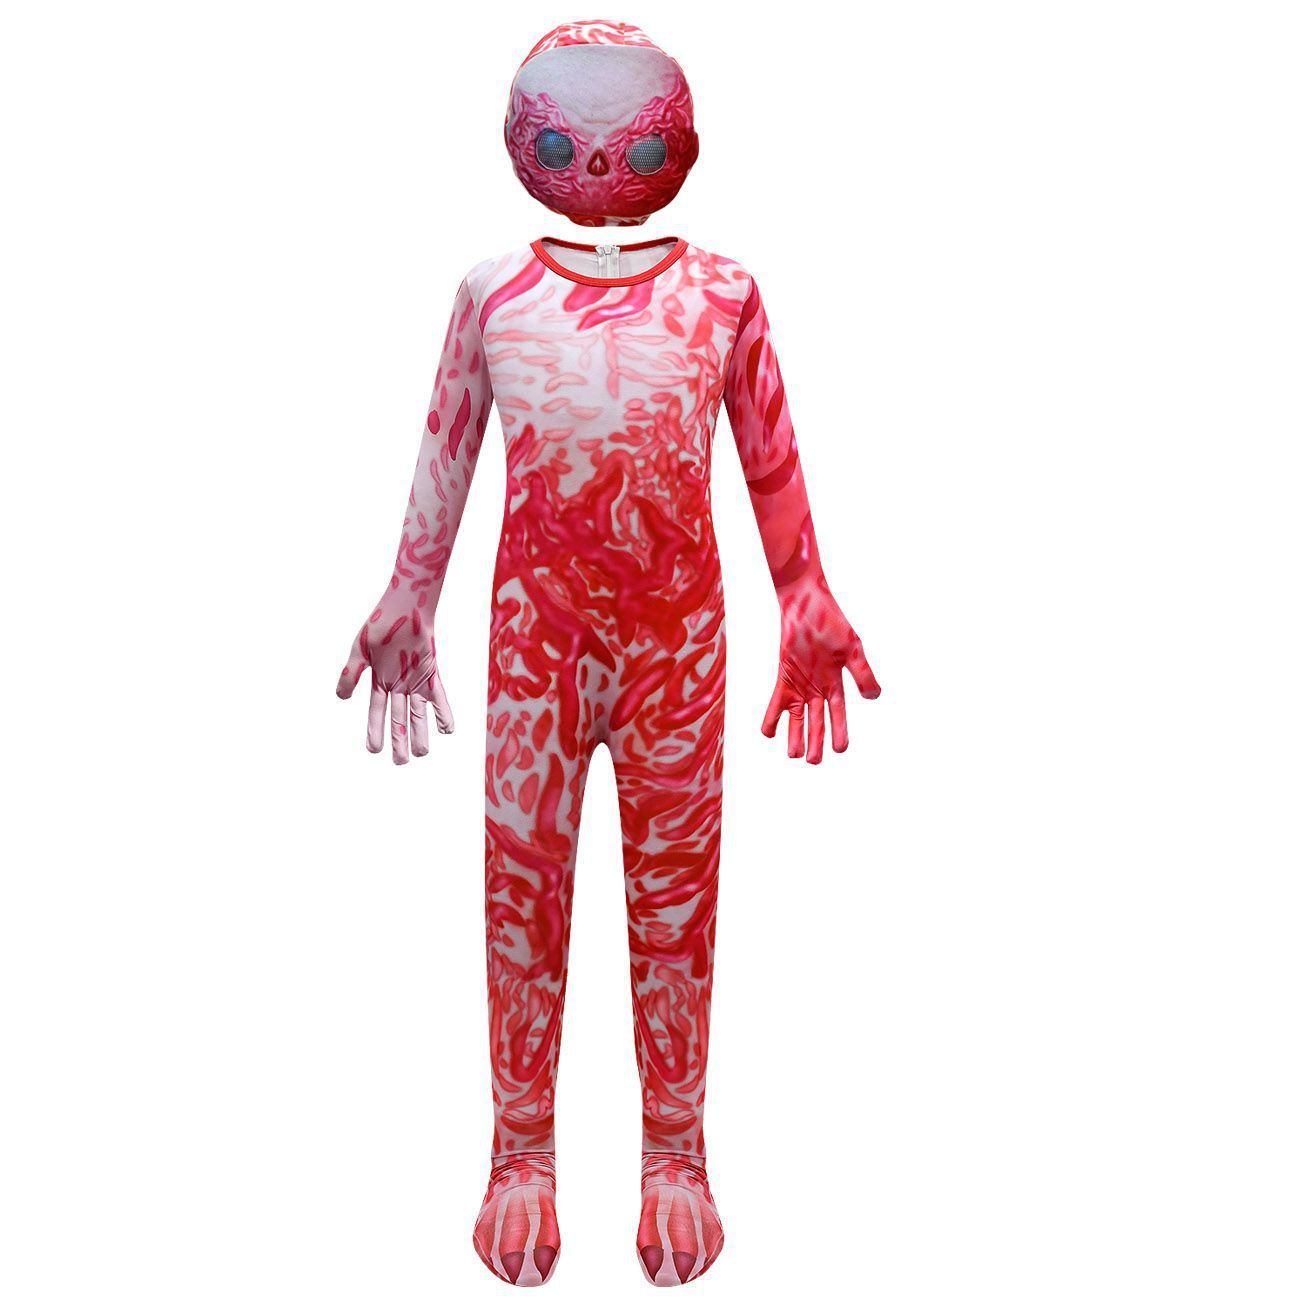 Stranger Things 4 red Cosplay Costumes Jumpsuit Romper Halloween Outfit For Kids